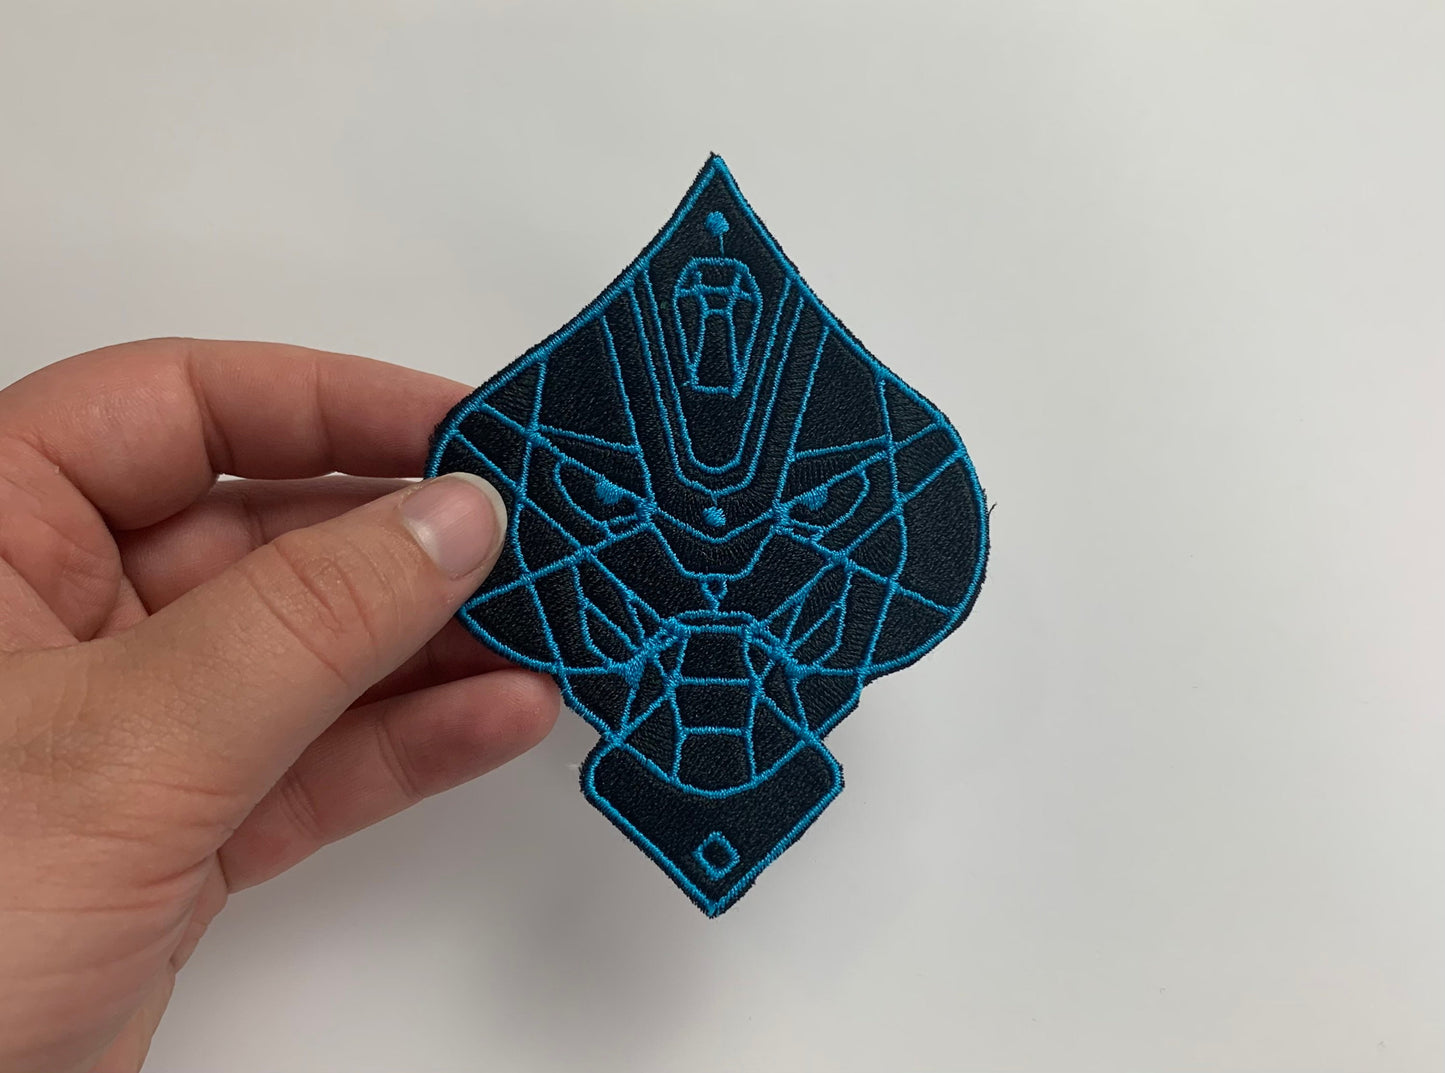 Ace of Cayde-6 Iron on Patch, Video Game Embroidered Patch, Game Character, Hunter, Ace of Spades